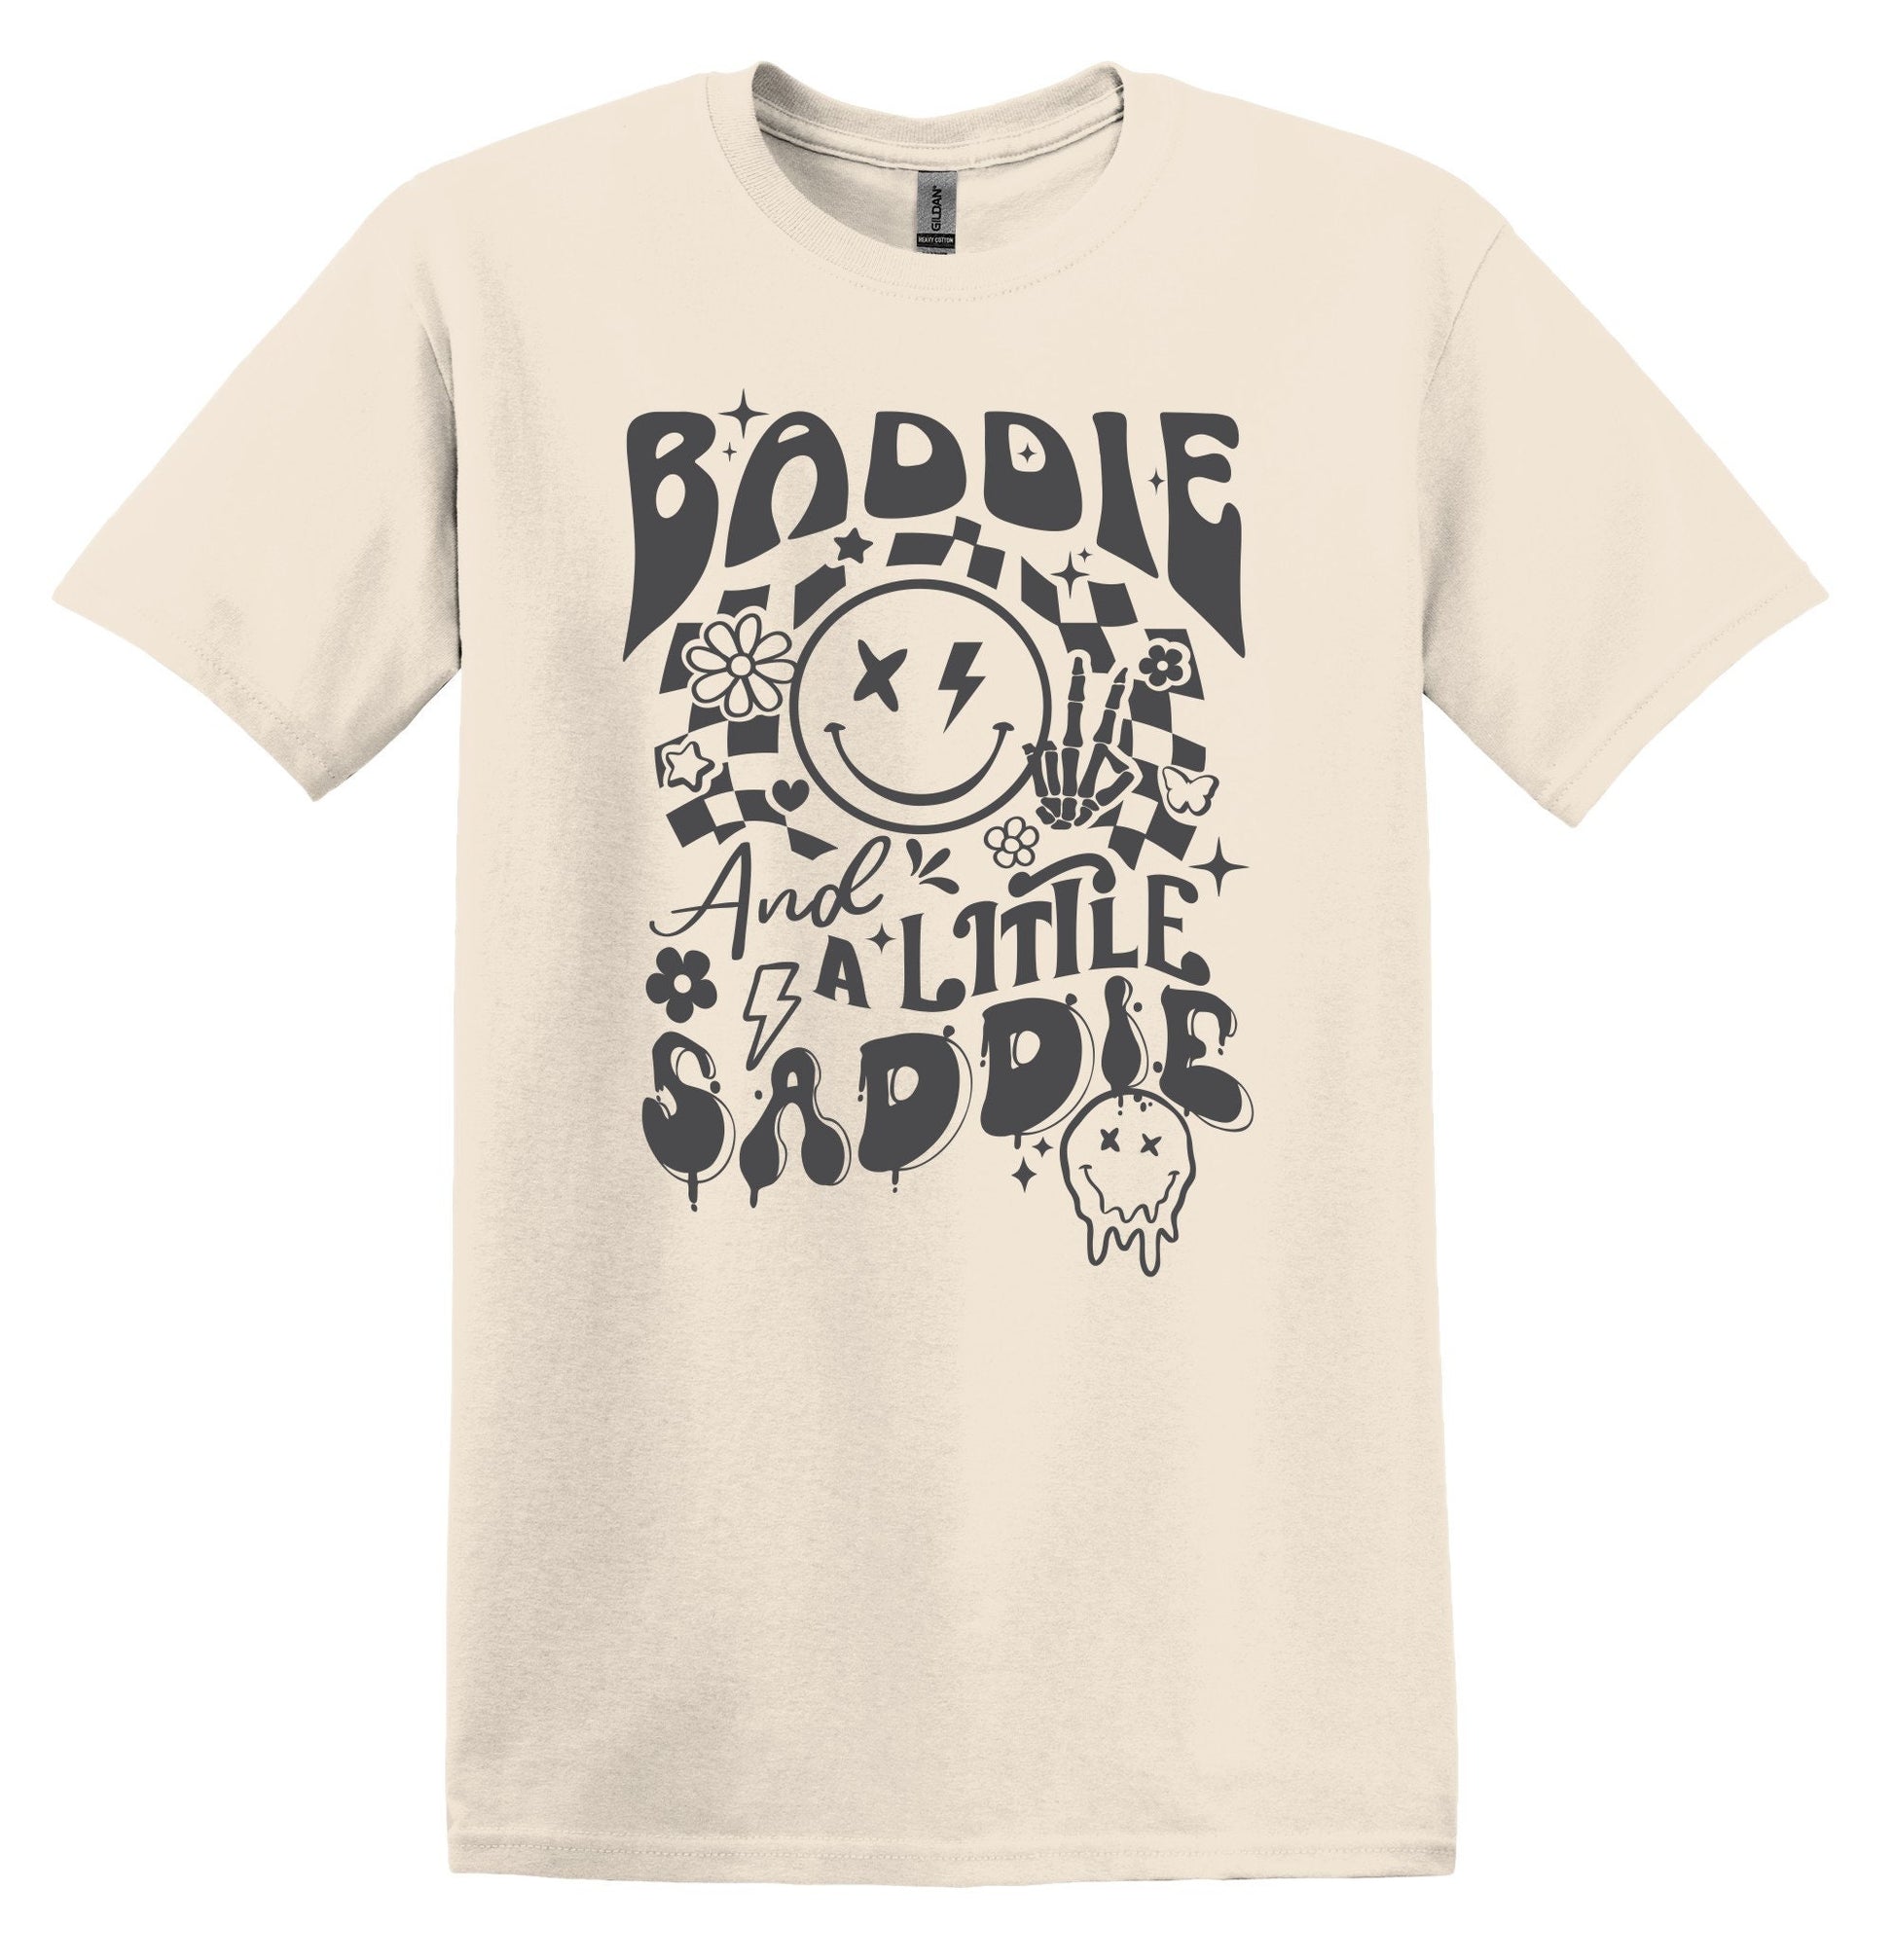 Baddie and a Little Saddie T-shirt Graphic Shirt Funny Adult TShirt Vintage Funny TShirt Nostalgia T-Shirt Relaxed Cotton Tee T-Shirt